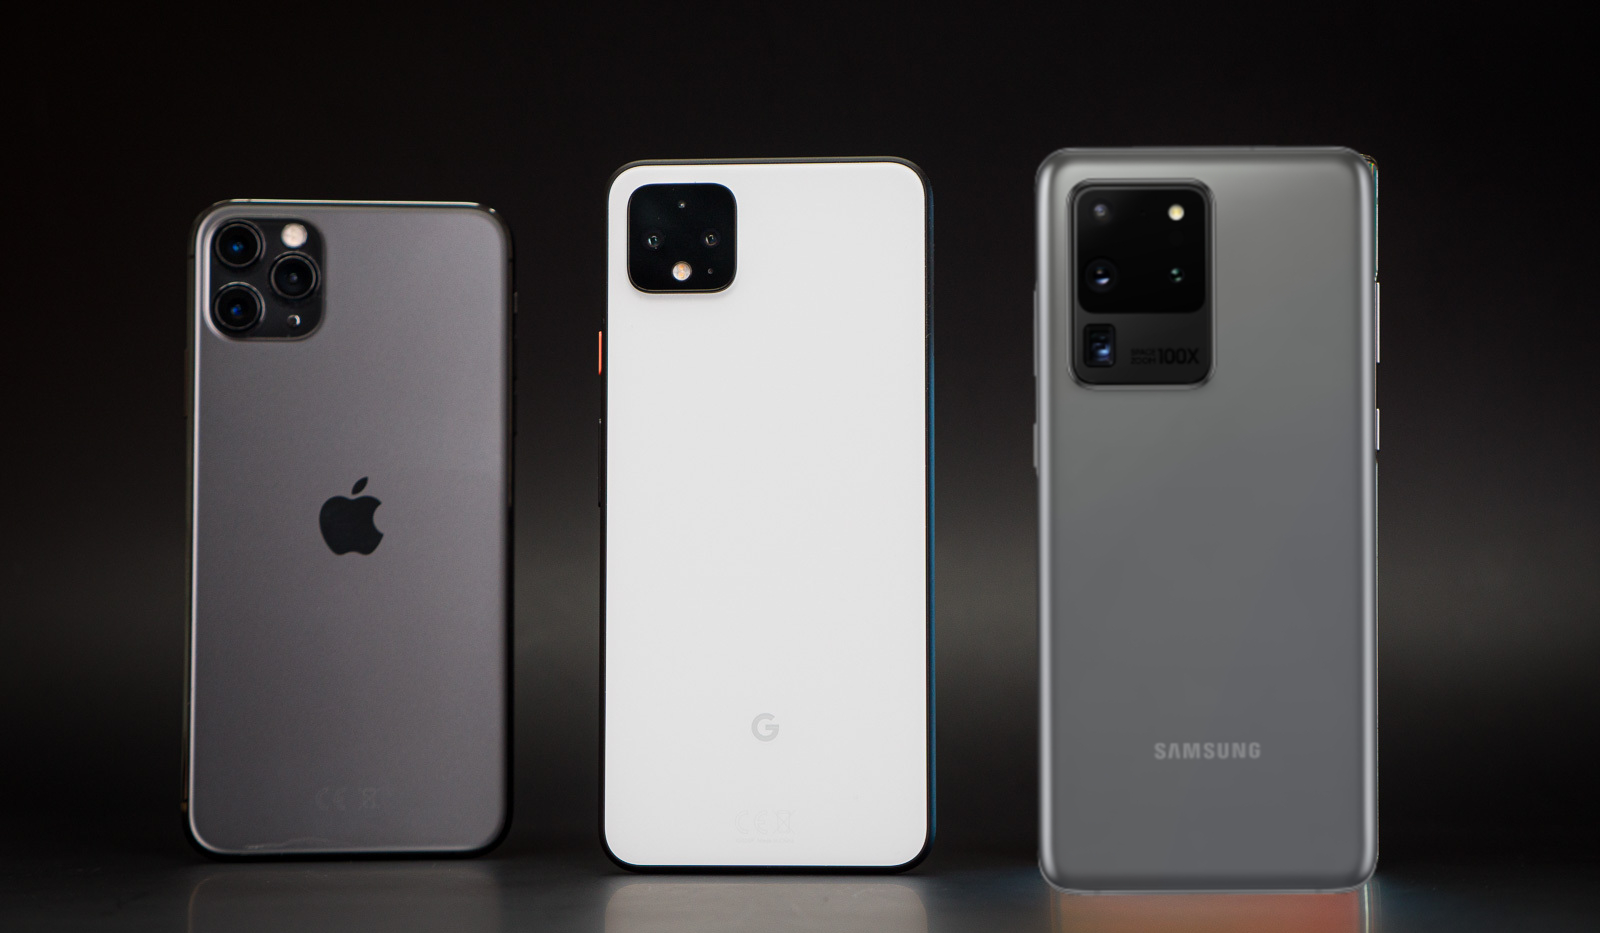 Galaxy S20 Ultra, iPhone 11 Pro Max and Pixel 4 XL: which is the best smartphone today?